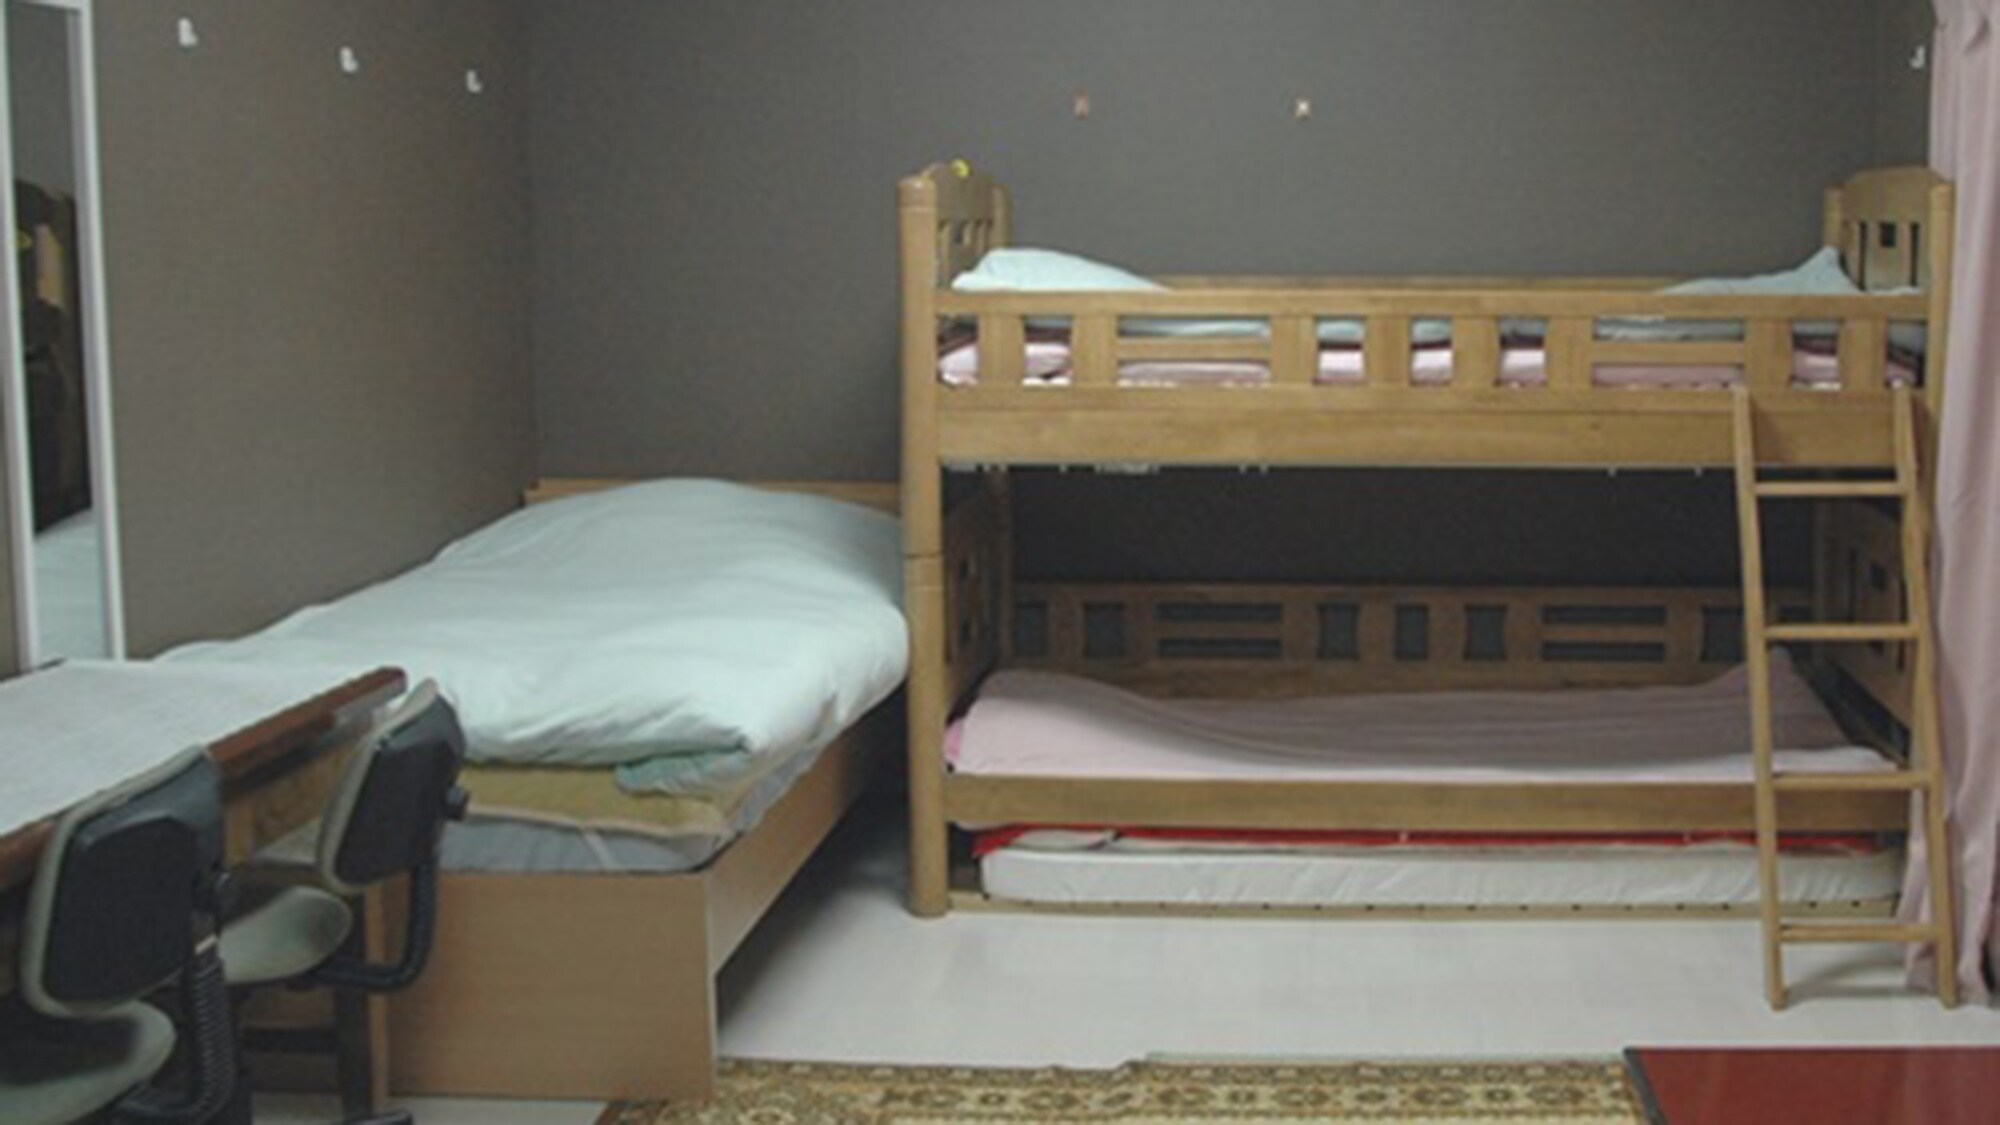 ・ Room 207 is a comfortable room with a bed, desk and low table in a 16 tatami space!